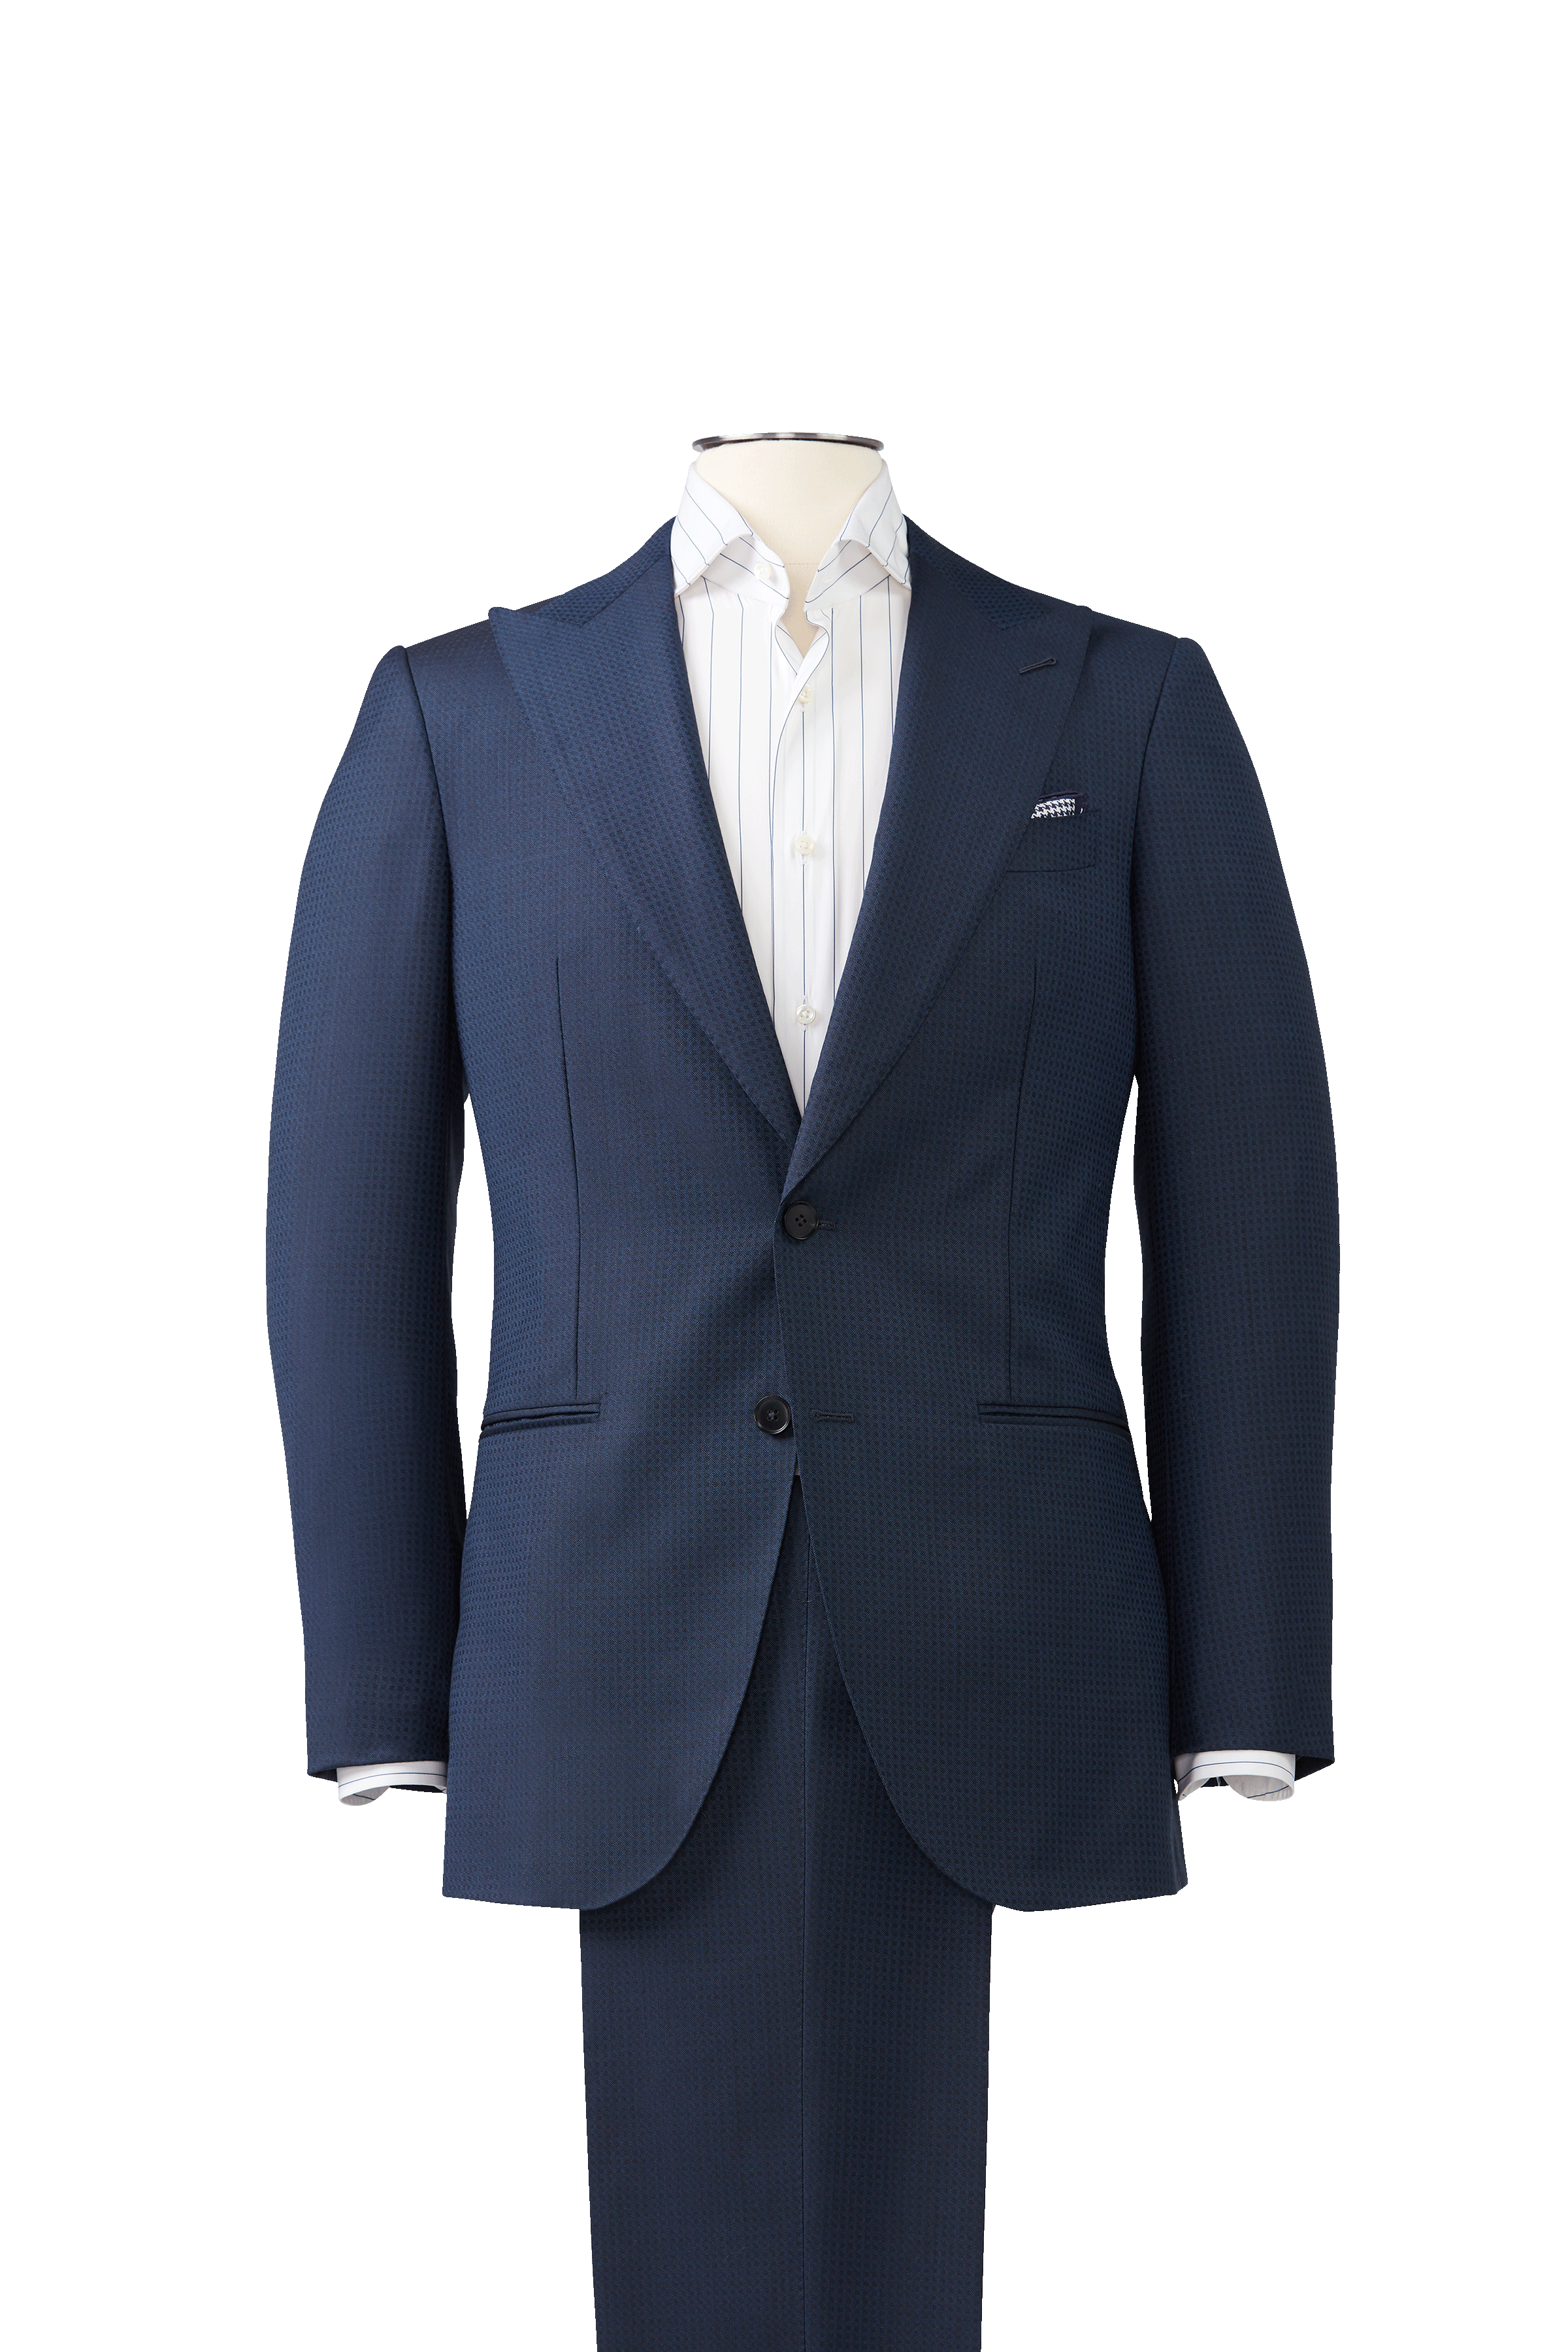 Check Standard Dormeuil Navy Suit by Knot